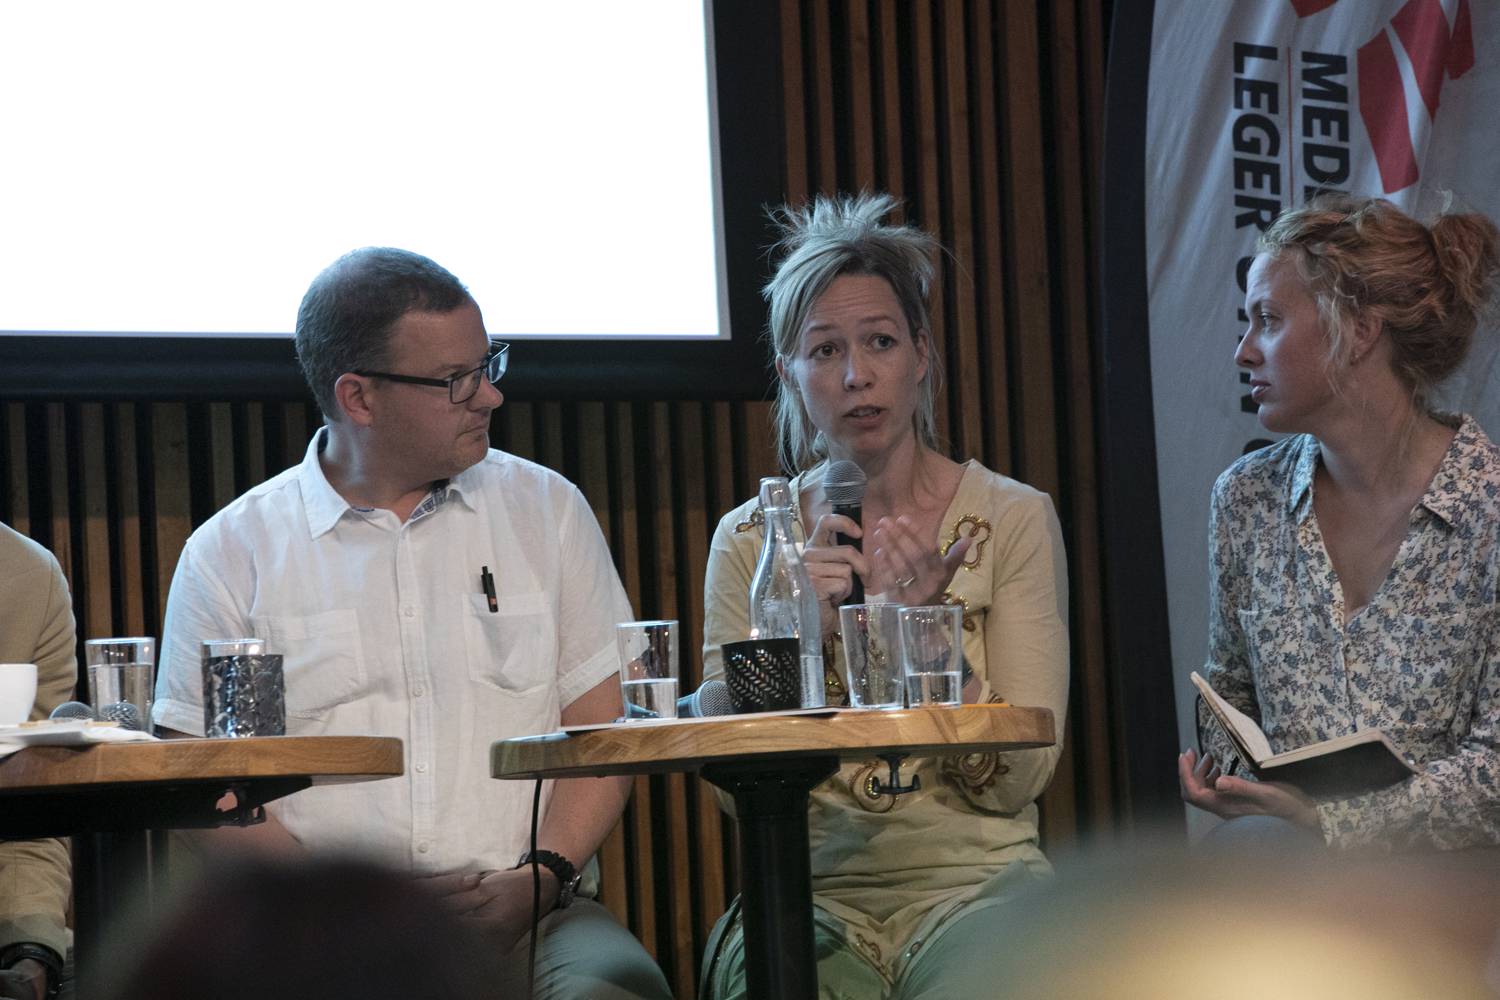 PRIO Research Professor Kristin Bergtora Sandvik at the launch of a new Doctors without Borders report on 4 June 2018. Photo taken at Kulturhuset in Oslo. Photo: Leger uten grenser/Marion Mossing